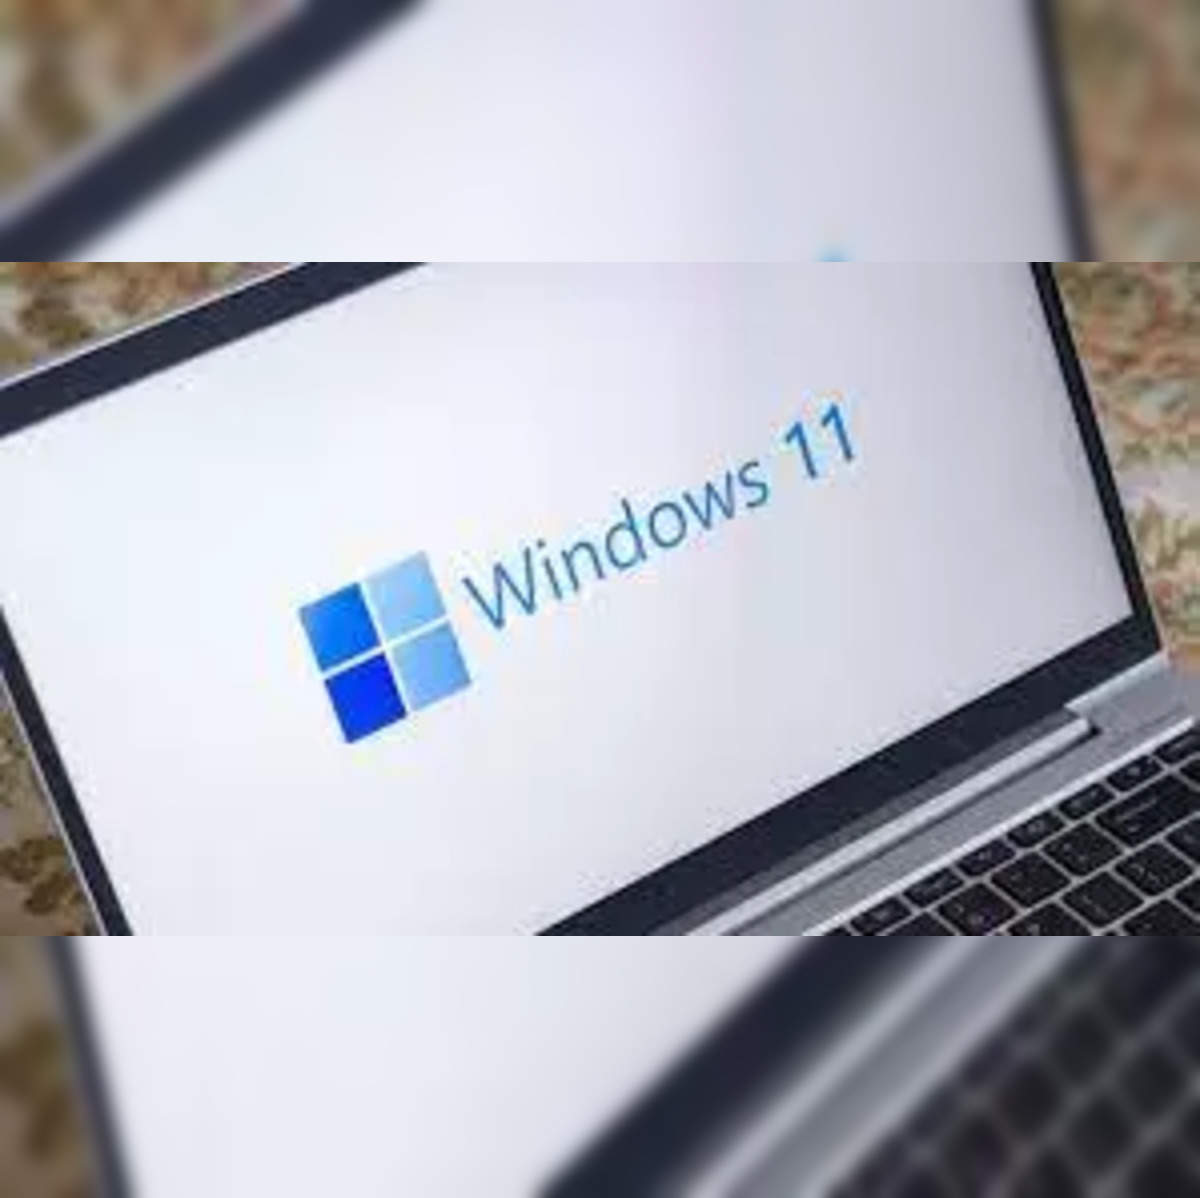 No need to wait. Here's how you can download Windows 11 right now